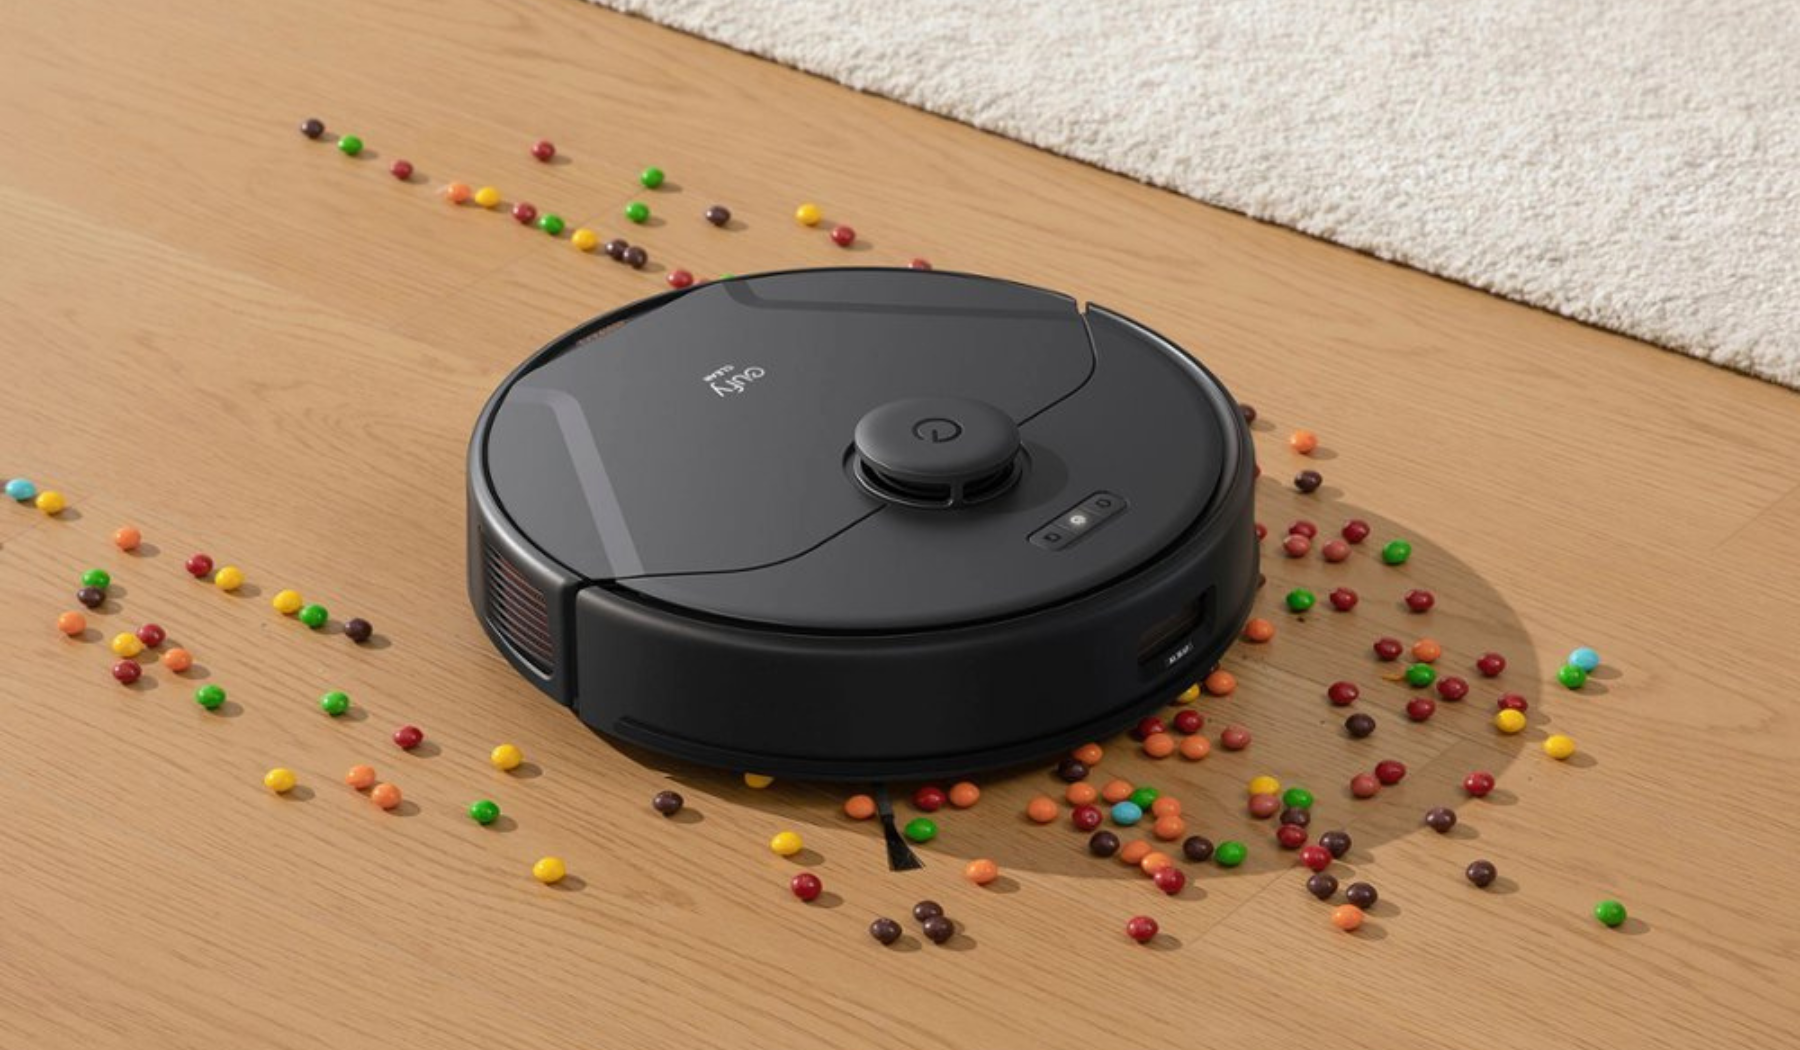 Eufy robot vacuum cleaning candy on hardwood floor with rug in background